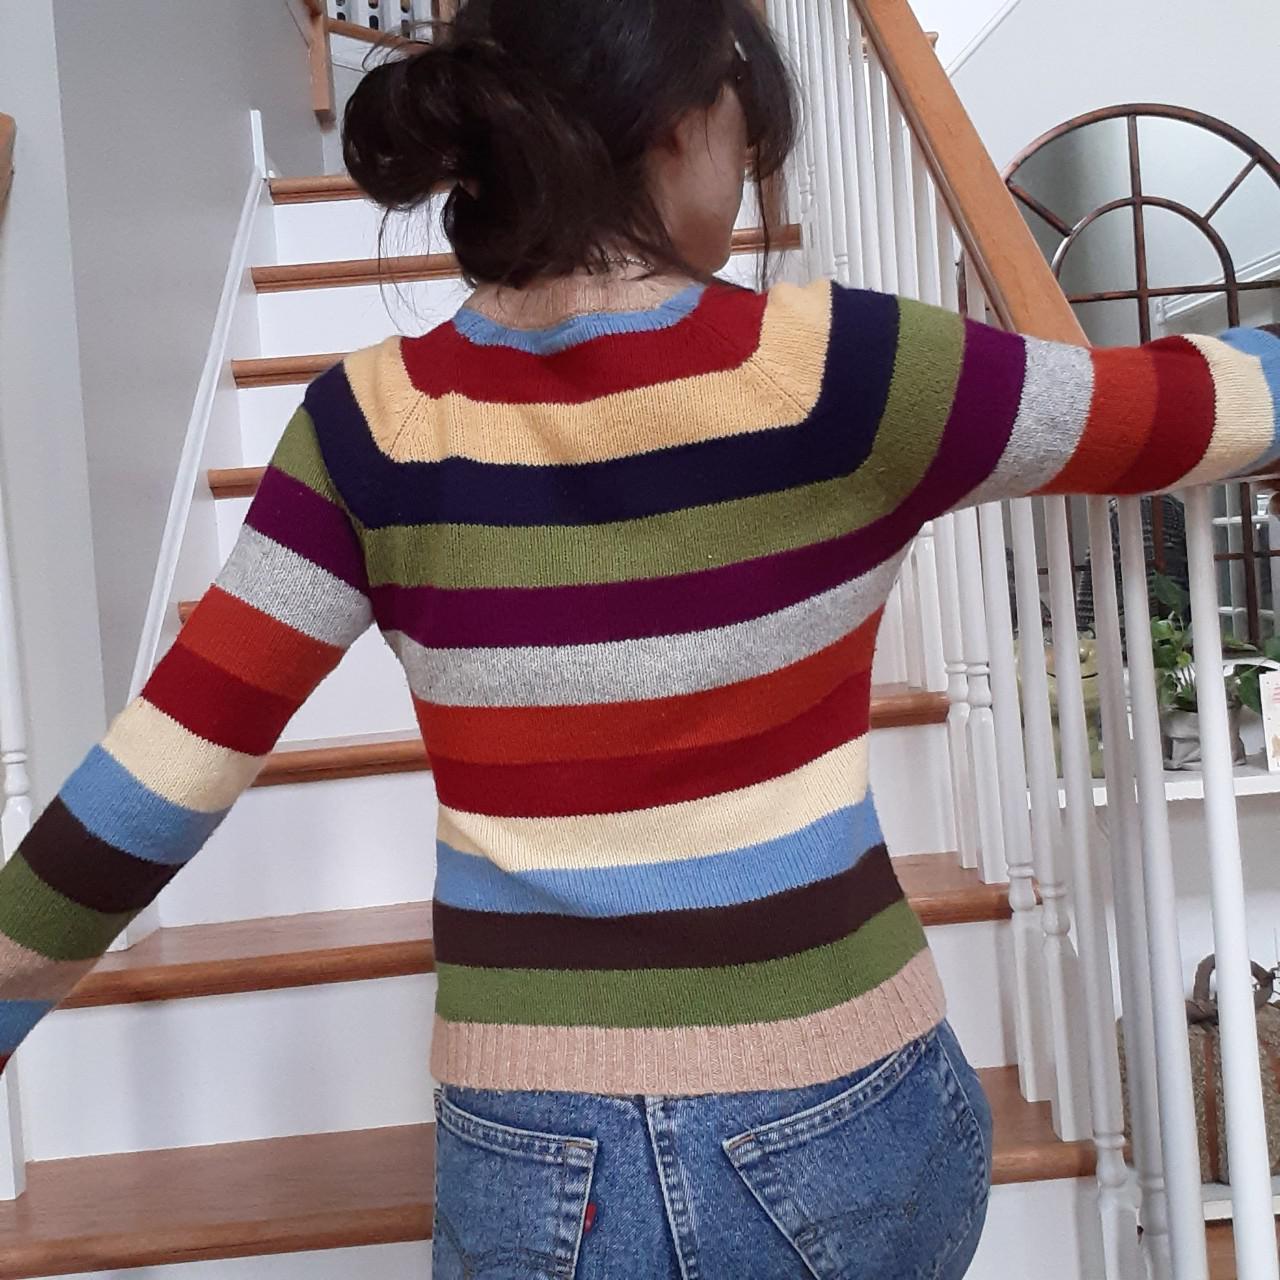 Product Image 3 - Colorful stripe sweater 
This sweater